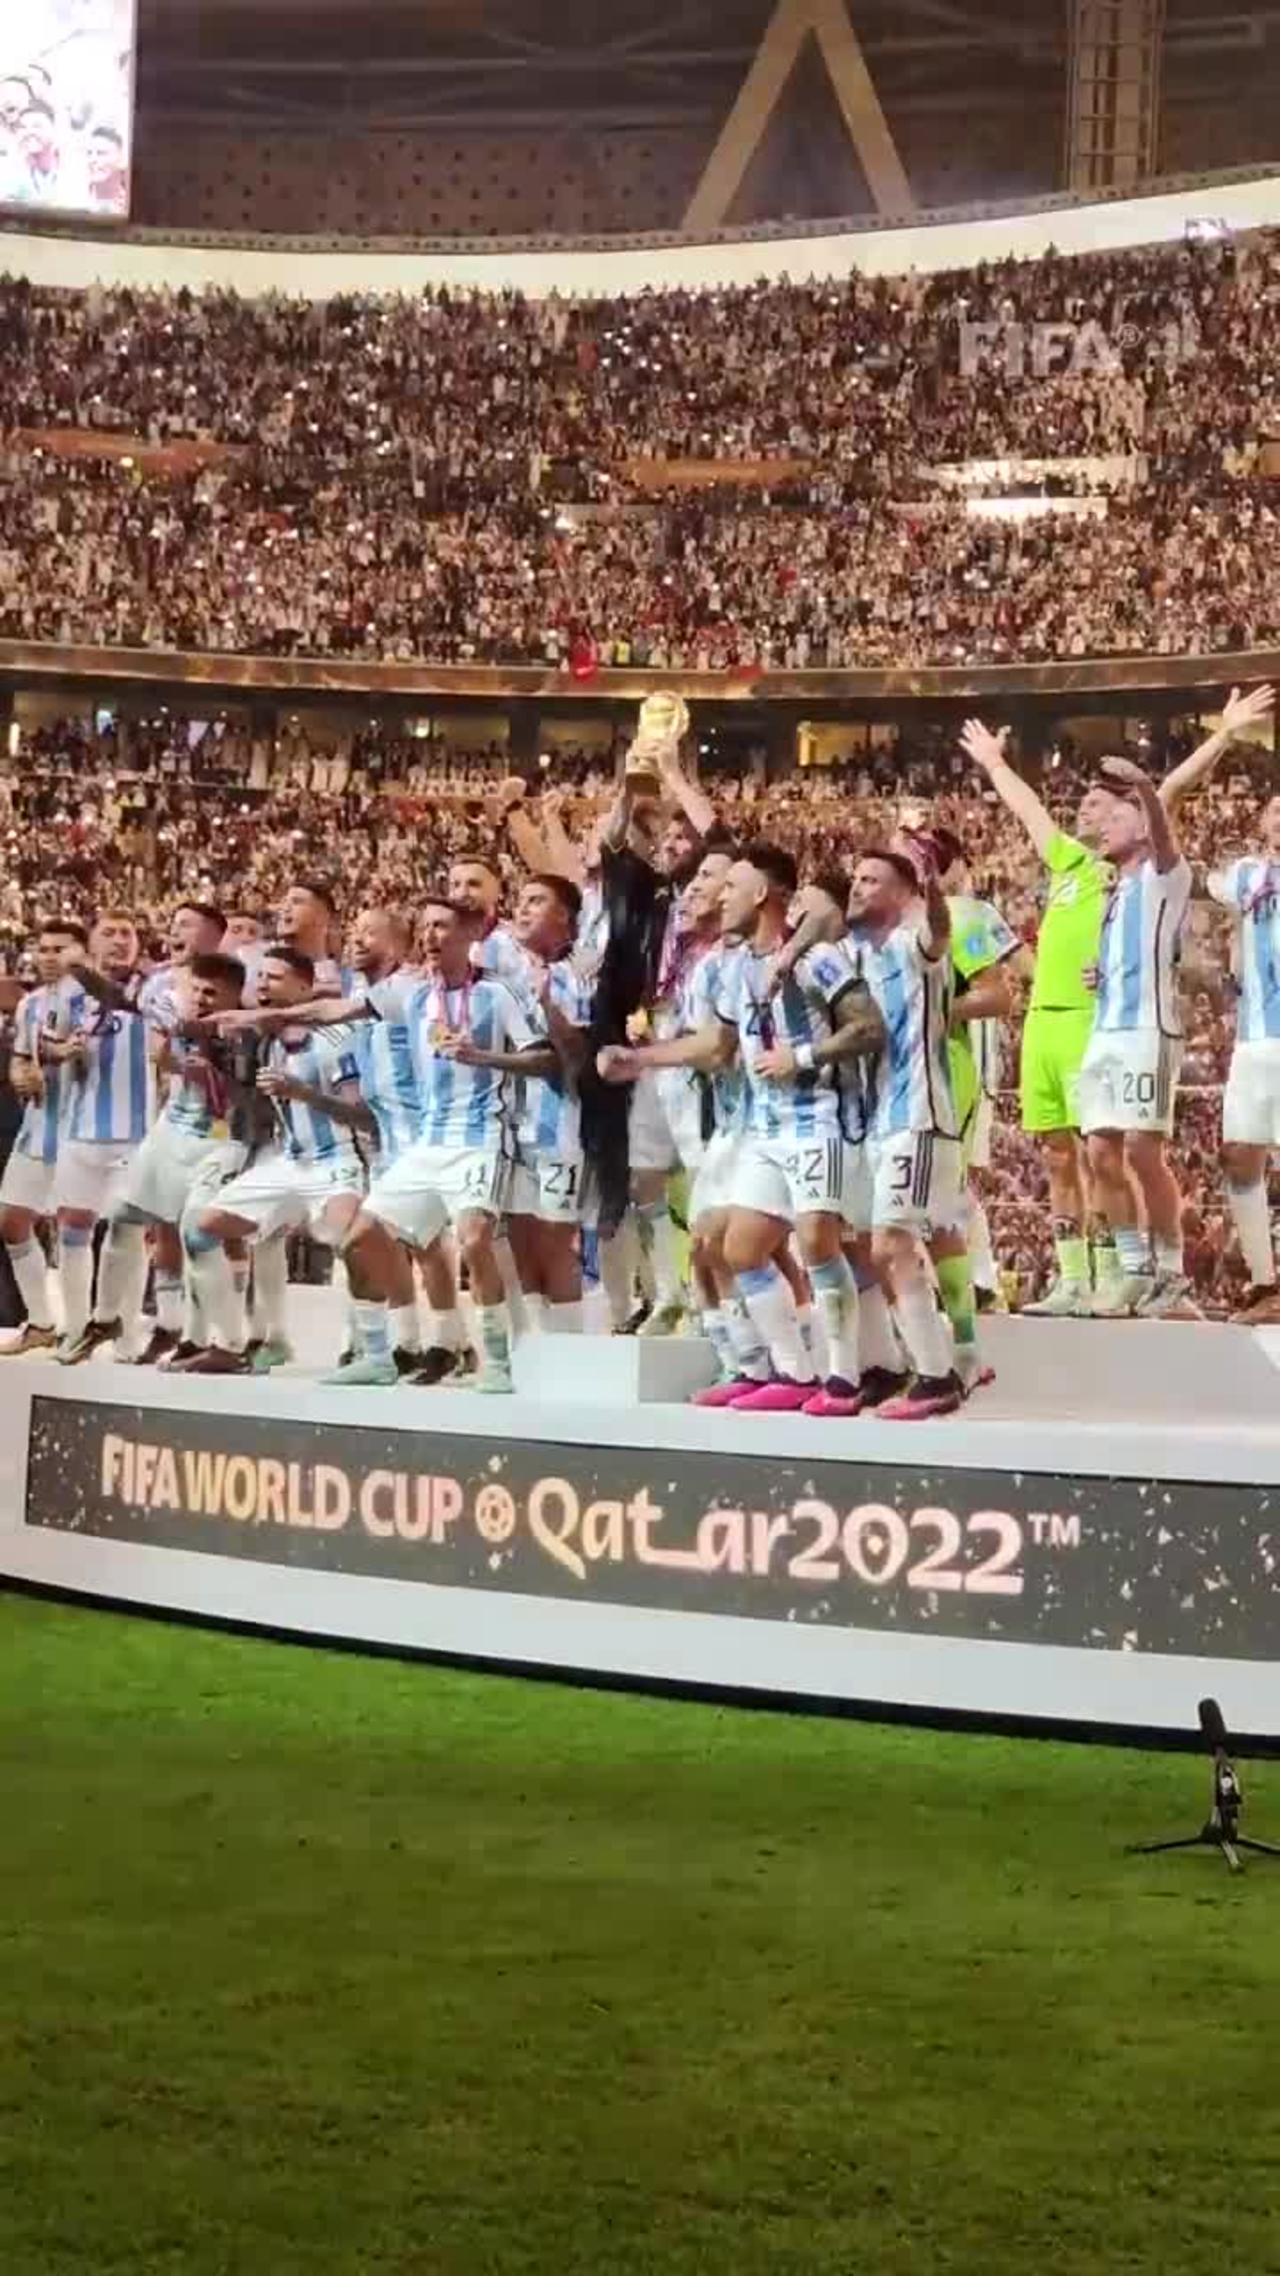 Argentina's dreams become reality 🏆